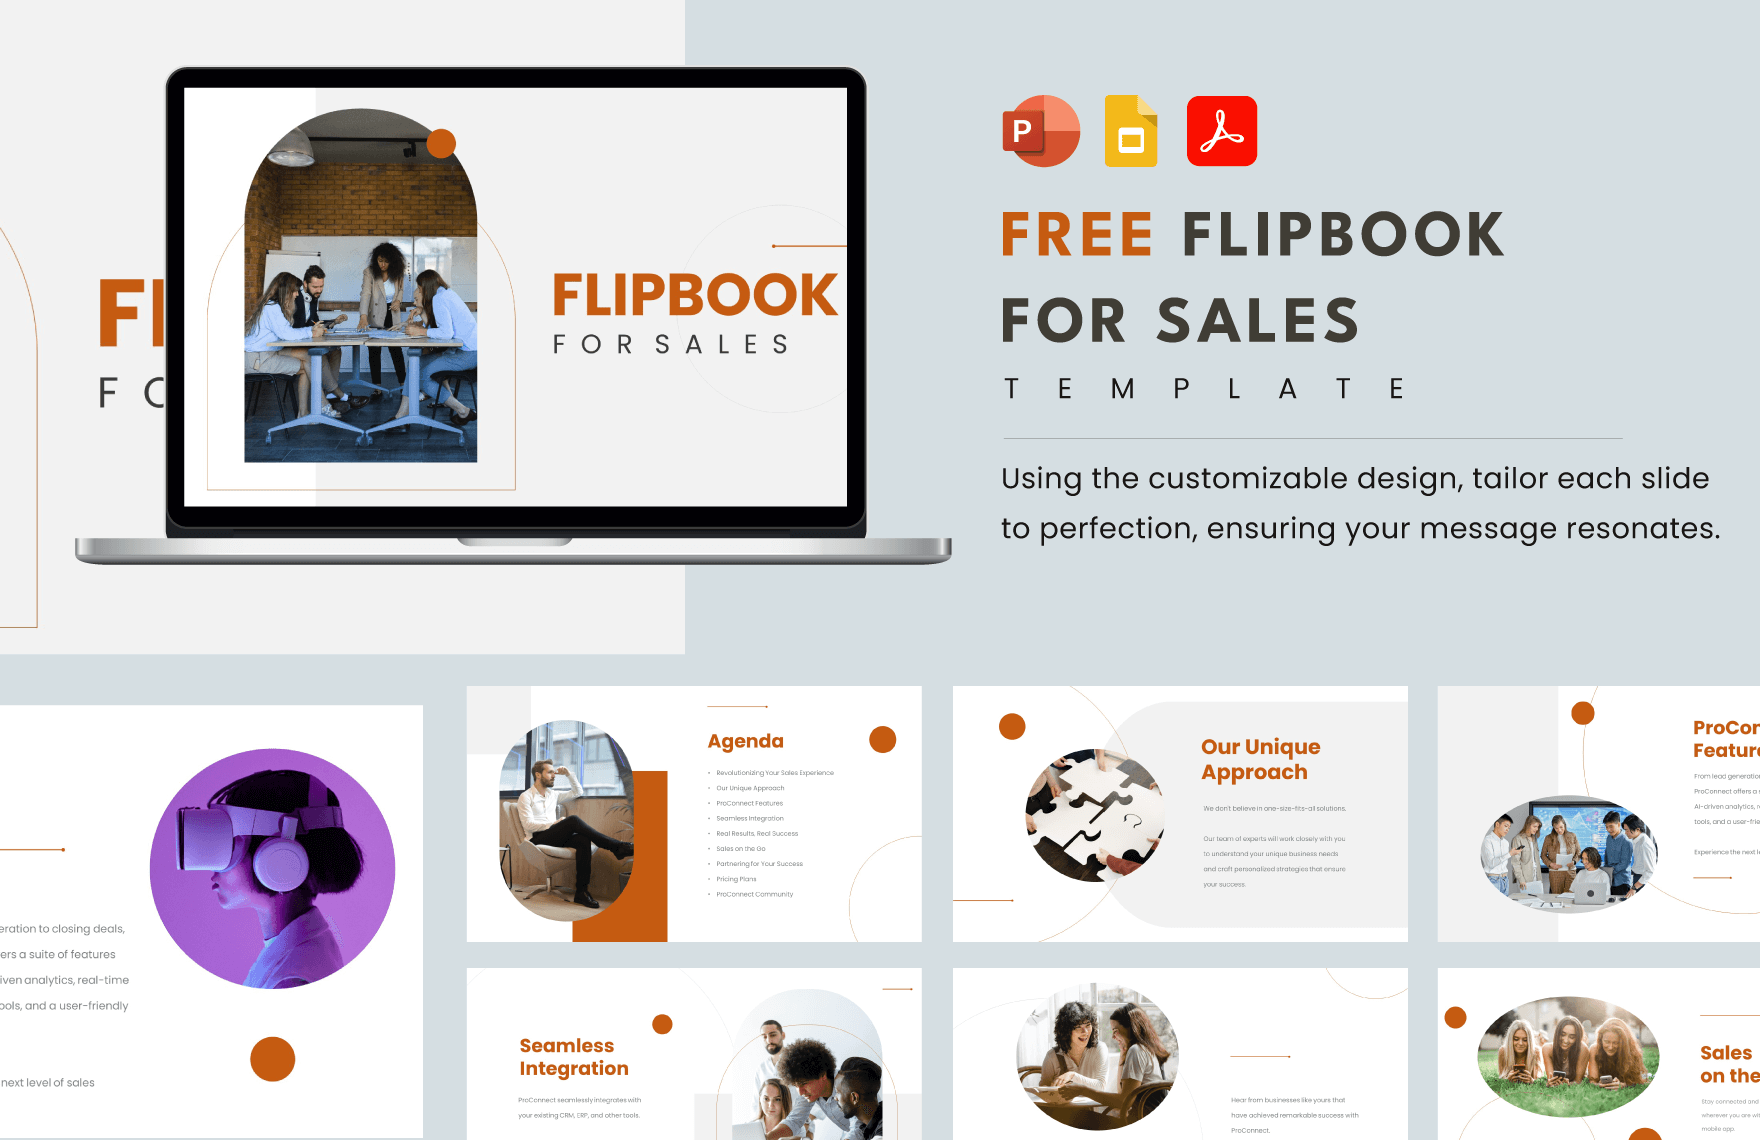 Flipbook for Sales Template